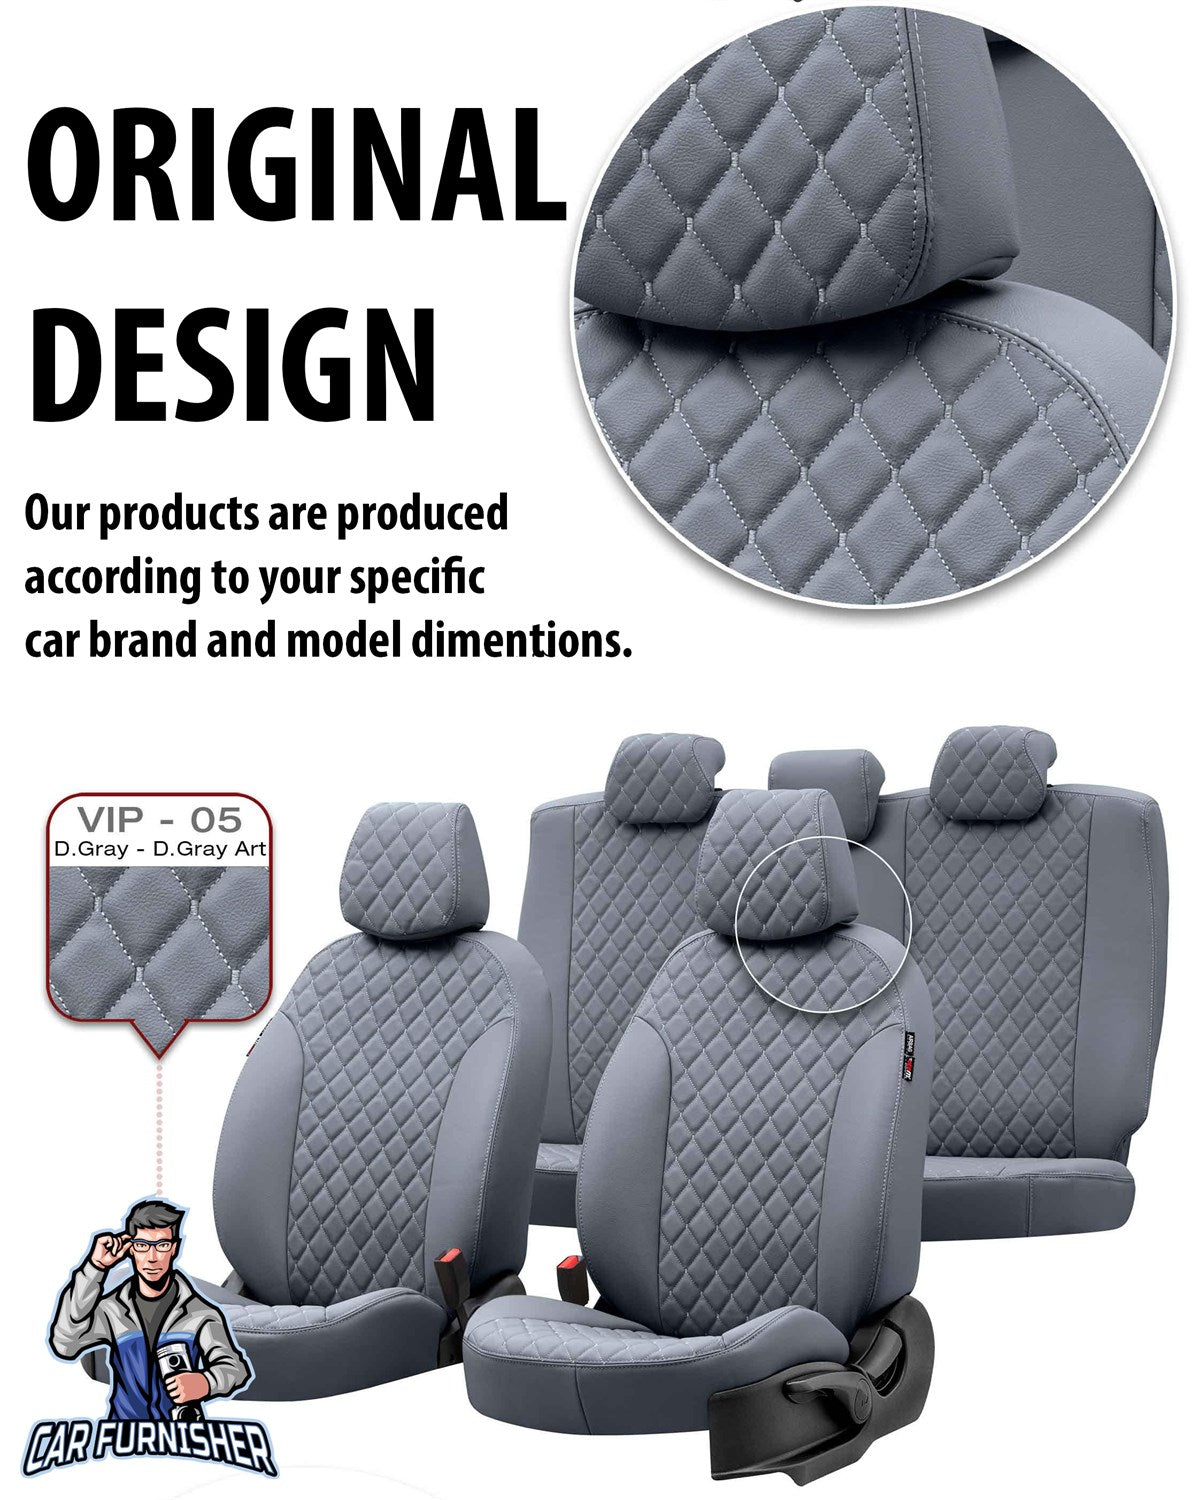 Volkswagen Transporter Seat Cover Madrid Leather Design Smoked Leather